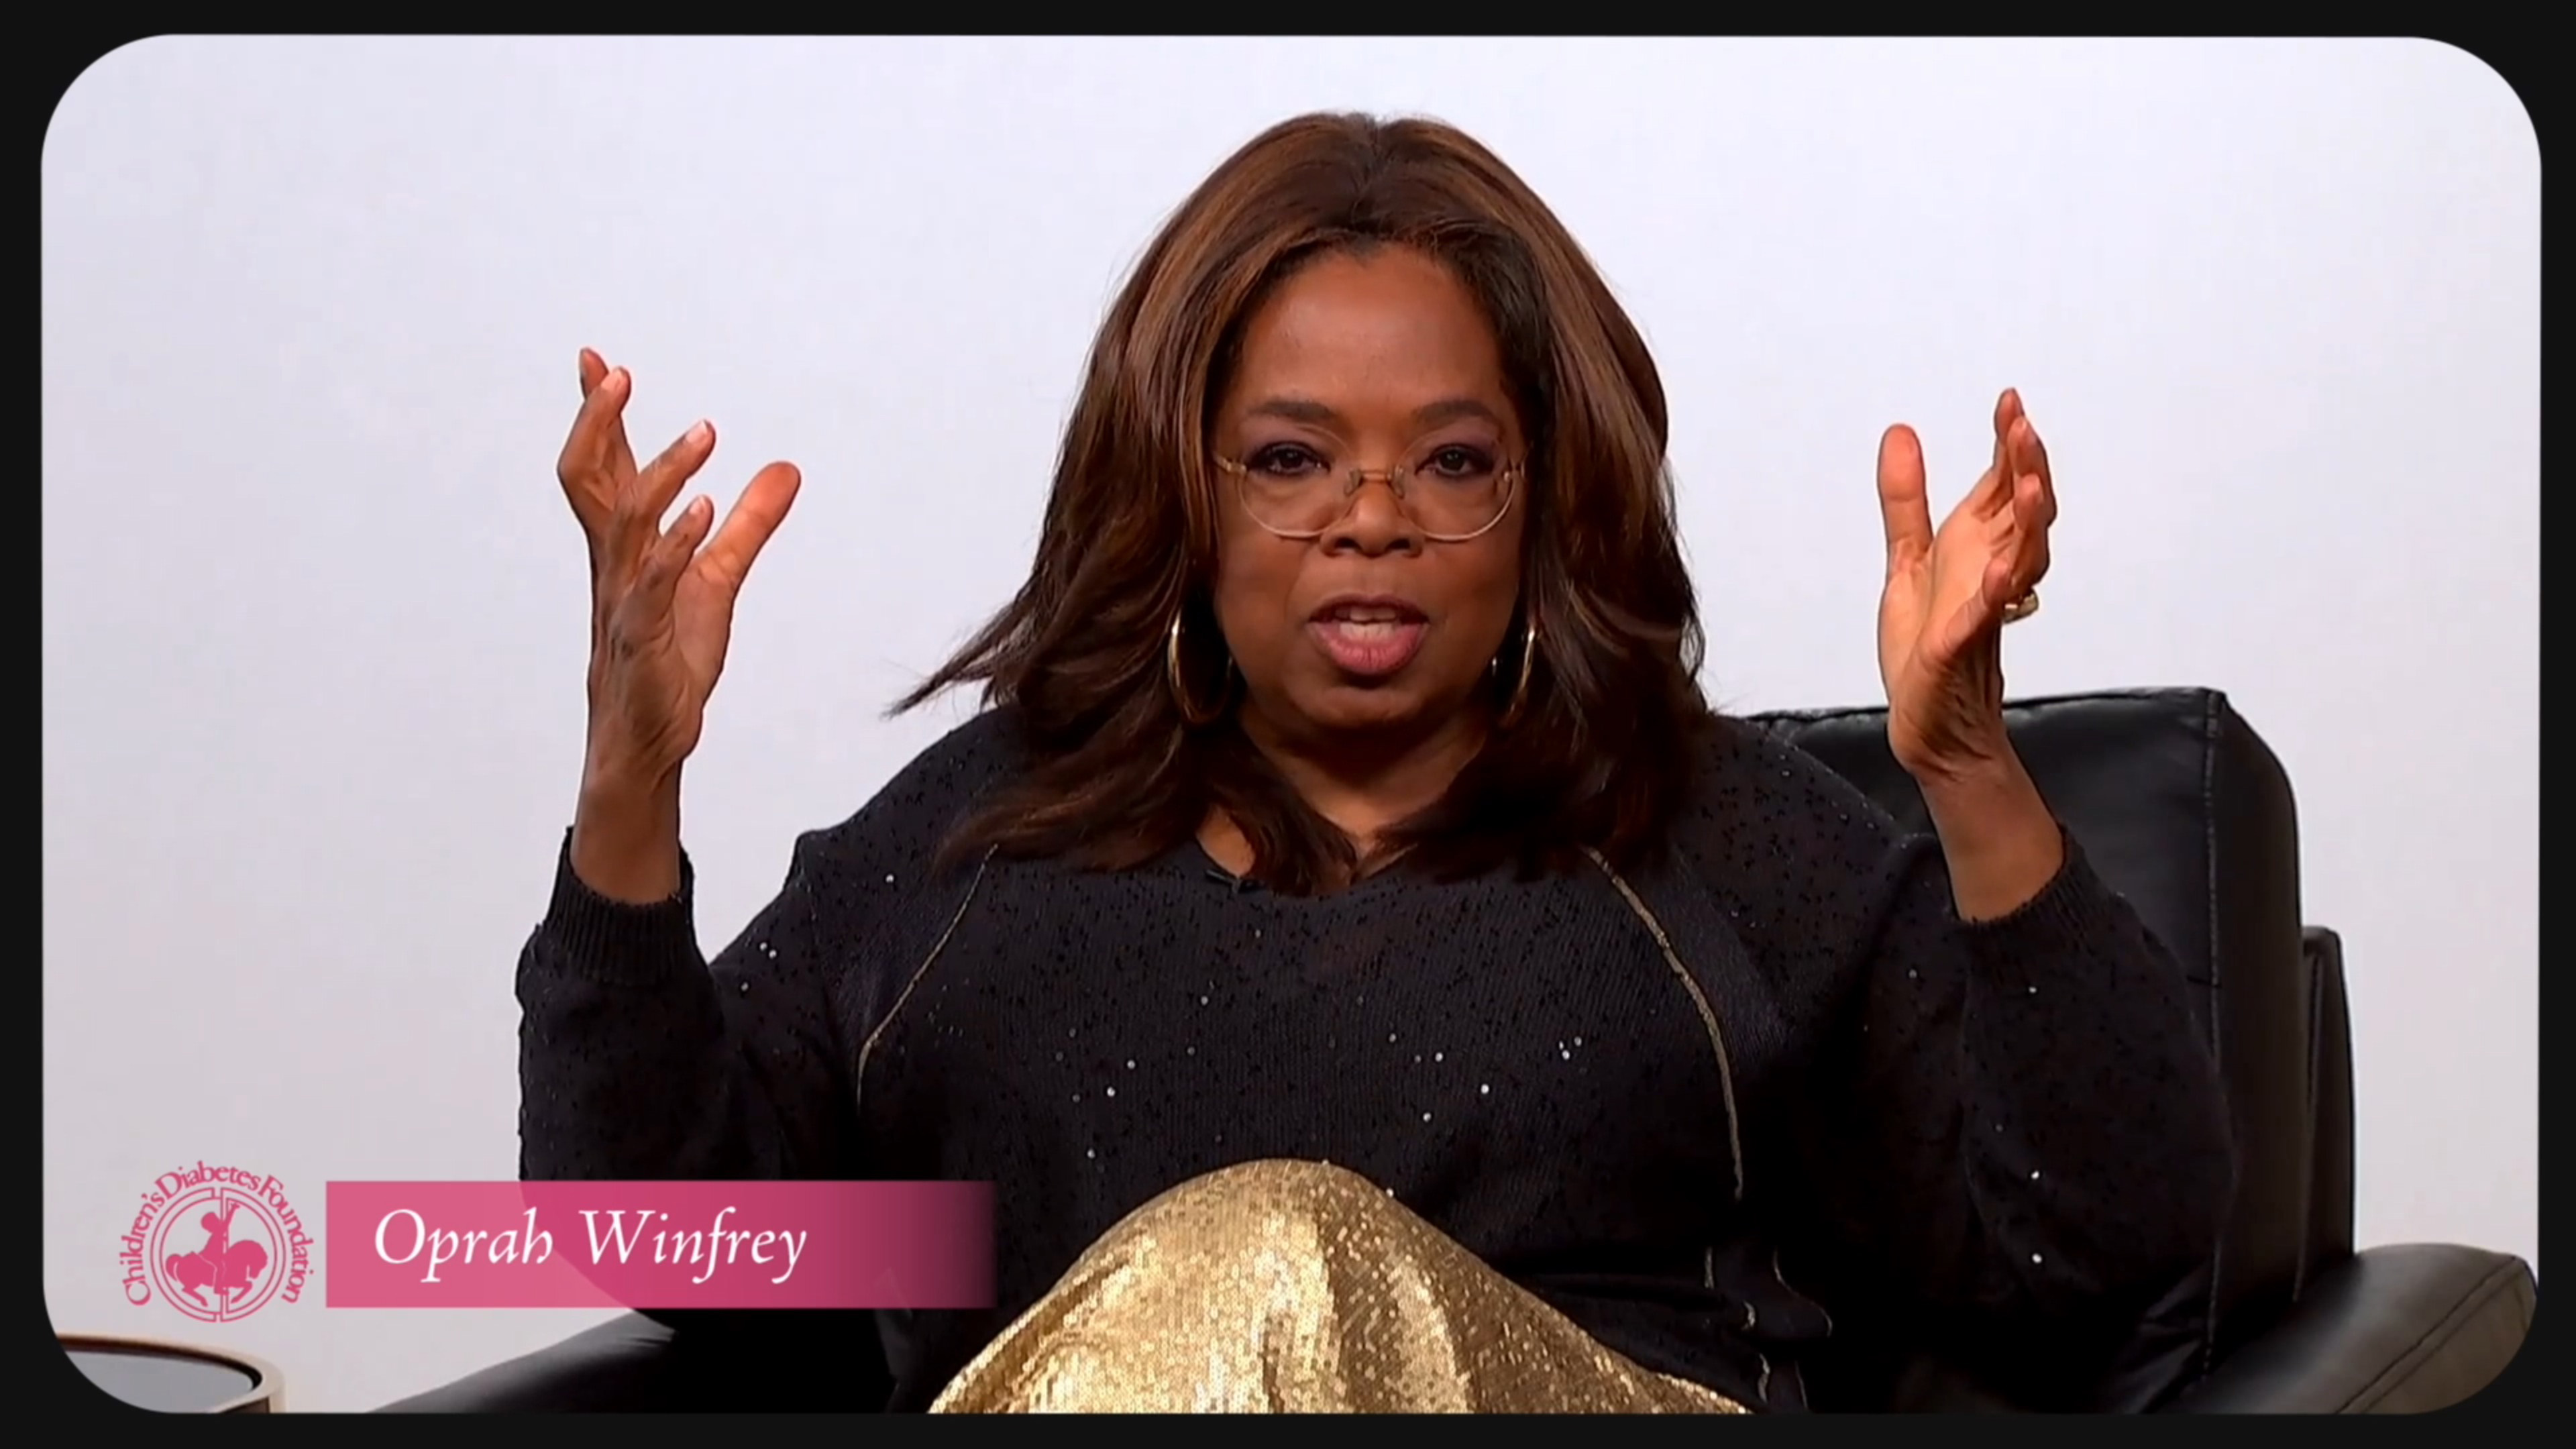 Screengrab of Oprah Winfrey speaking onstage during appearance at benefit for the Children’s Diabetes Foundation